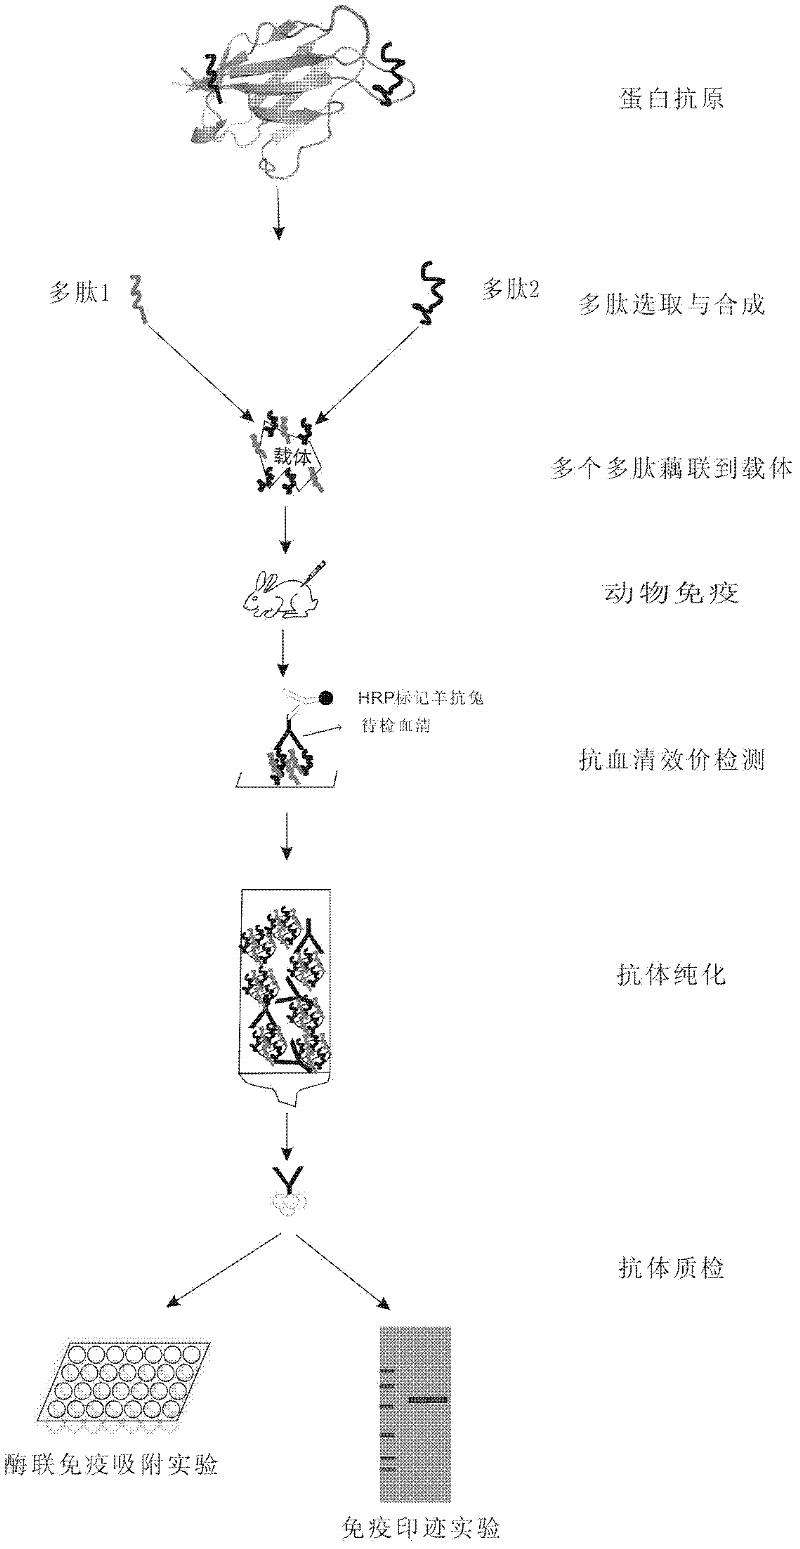 Method for producing antibody by coupling multi-polypeptide epitope of protein antigen with carrier